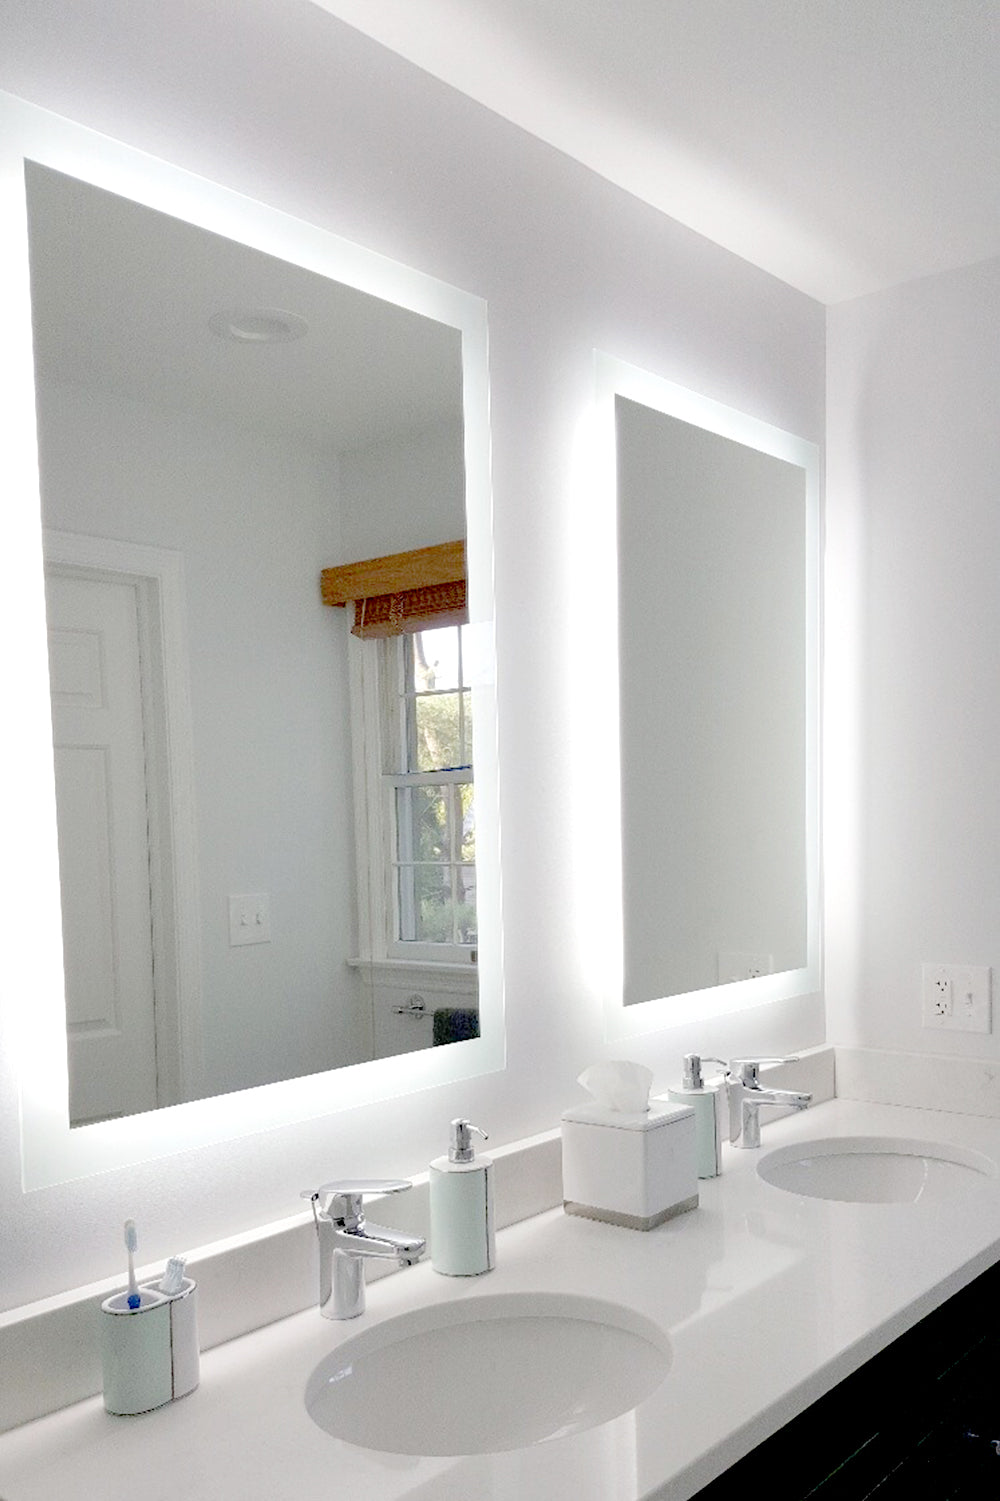 LED Mirror (Side-Lighted) 24" x 32" (or 32" x 24")